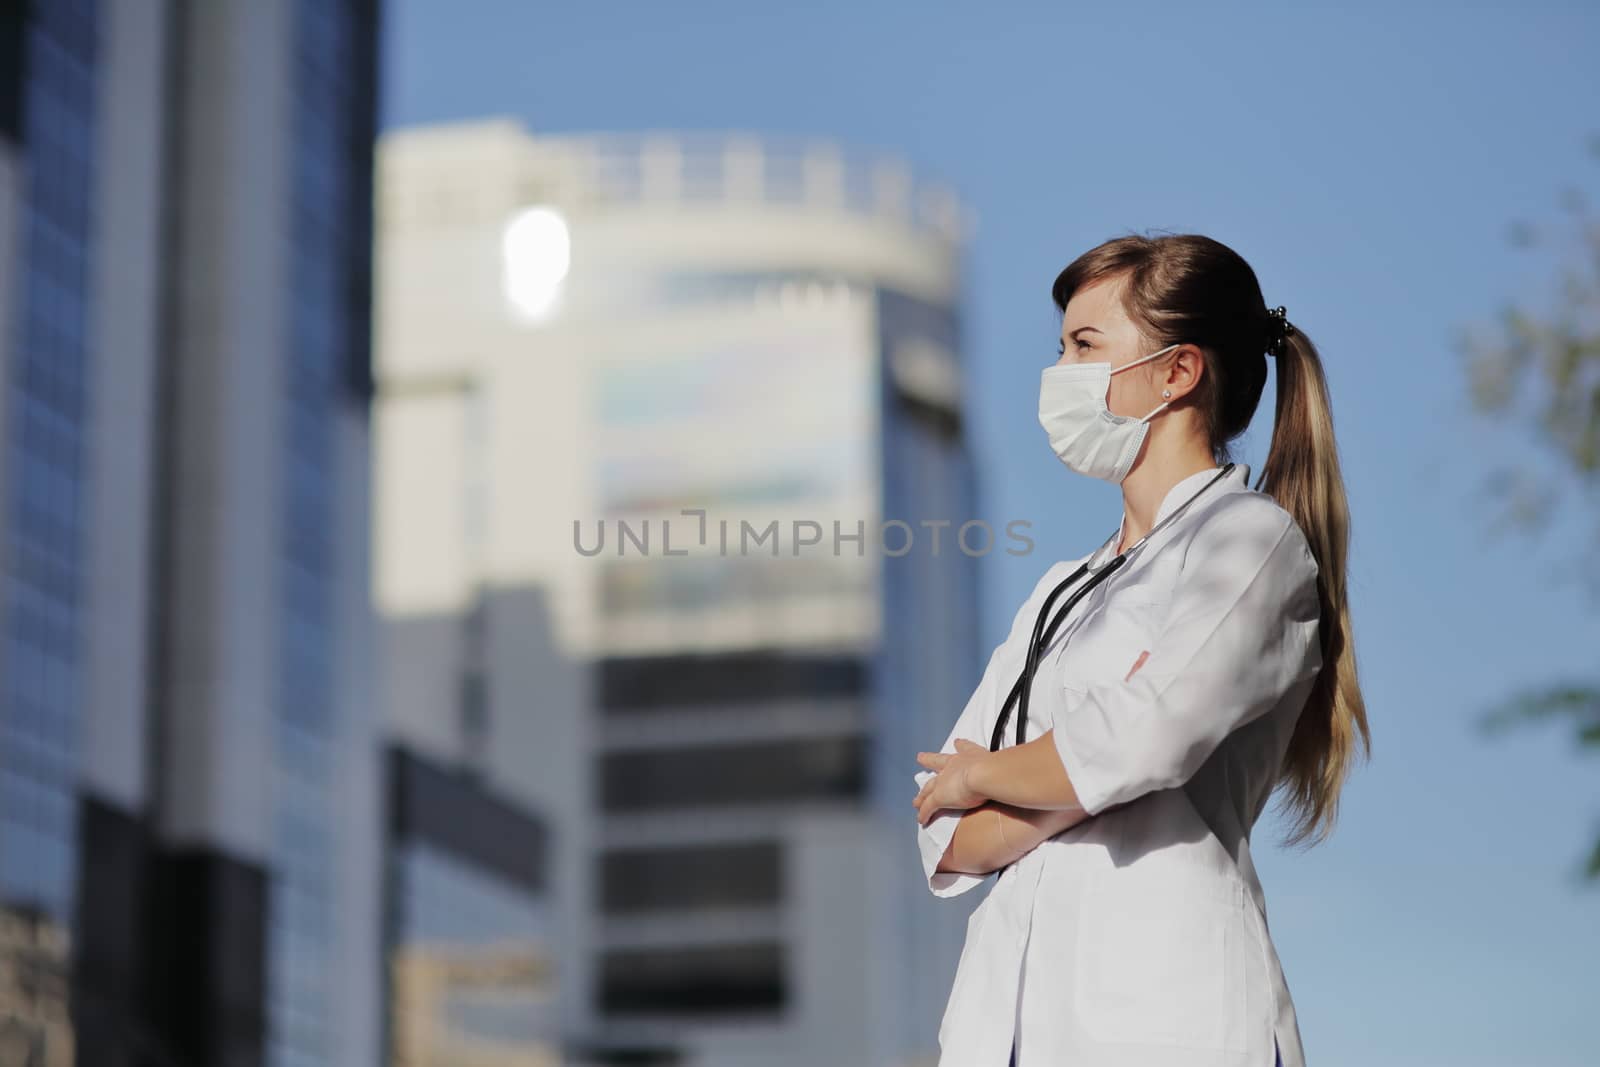 Female doctor, a nurse wearing a protective face mask in the city. Skyscraper, sky. Safety measures against the coronavirus. Prevention Covid-19 healthcare concept. Stethoscope. Woman, girl.